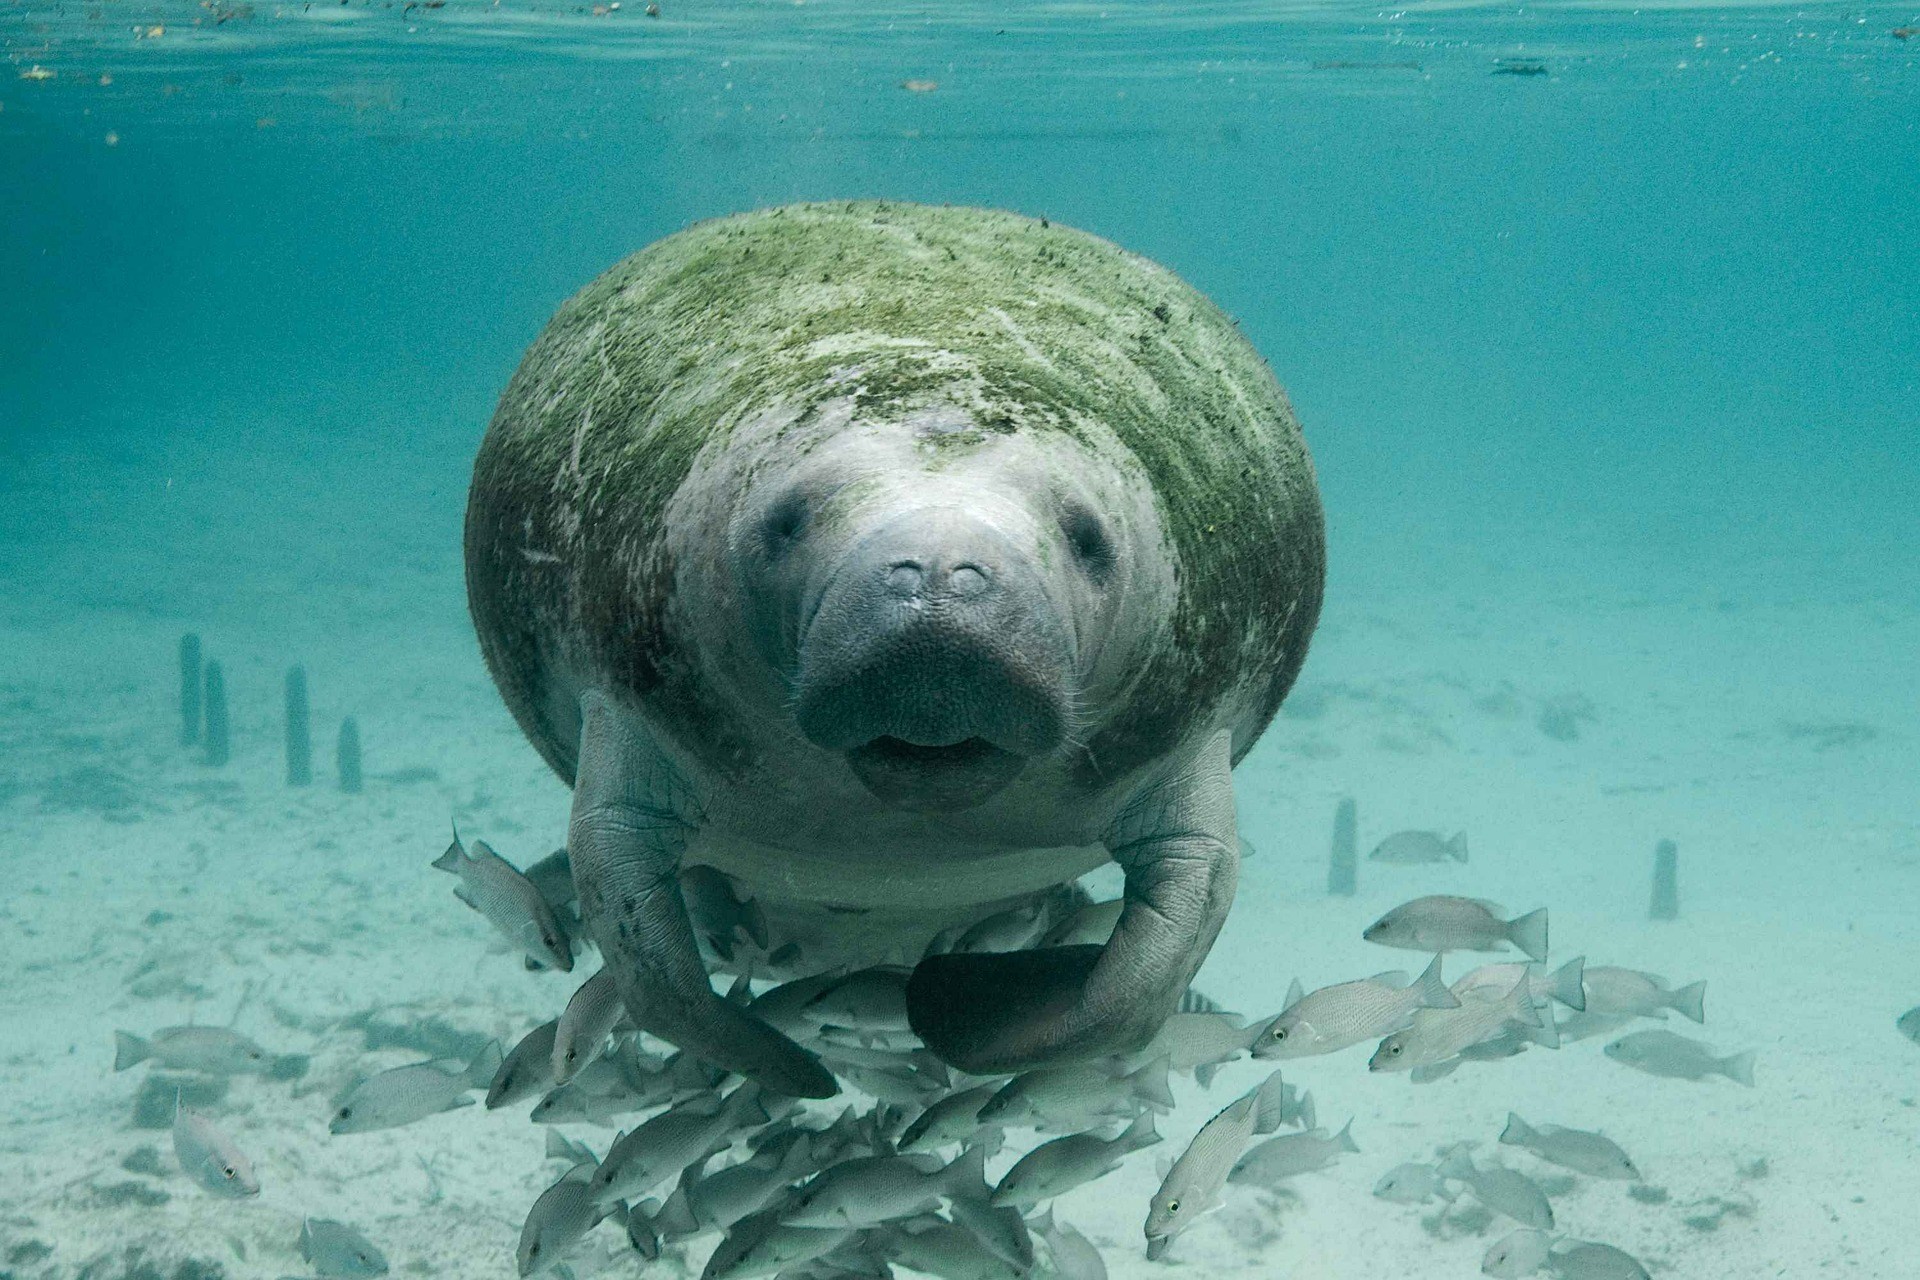 Search for endangered Manatees